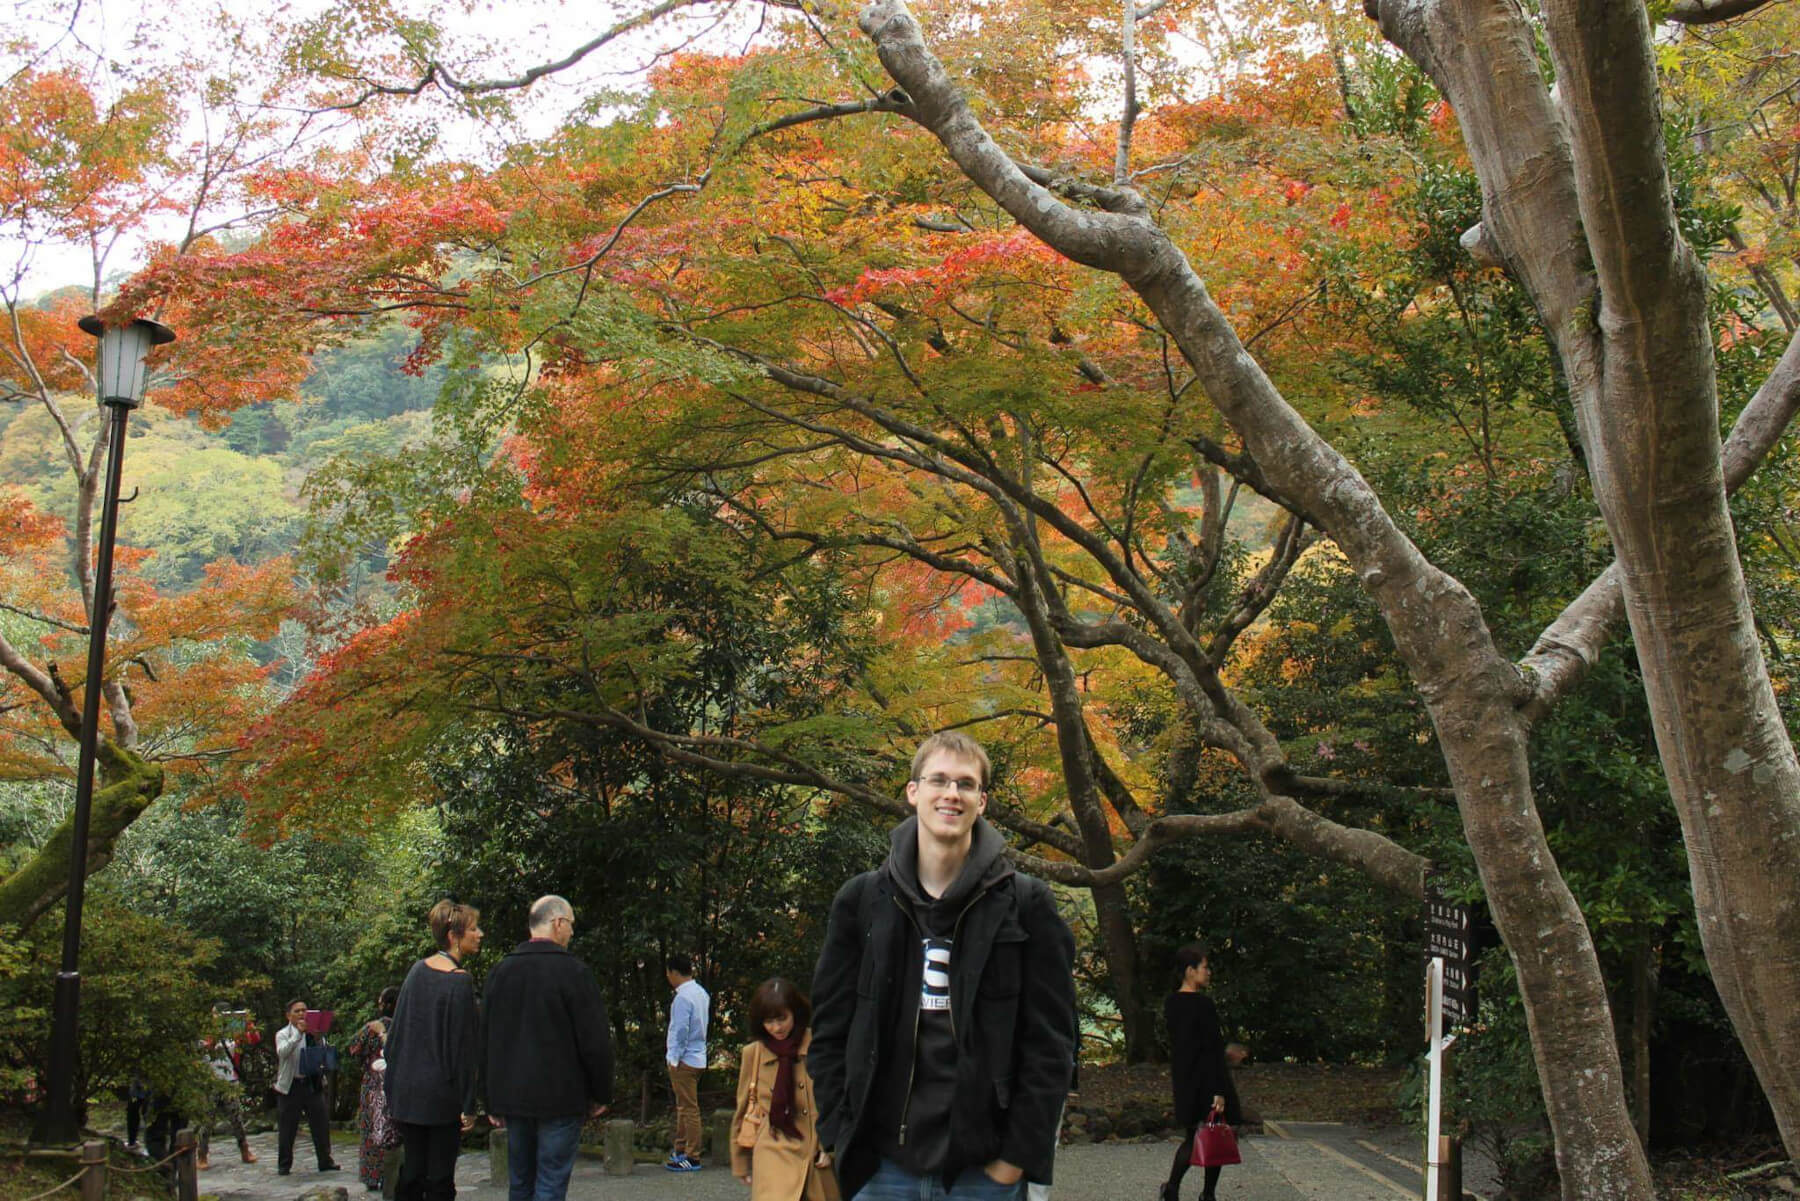 DigiPen grad at a Japanese park in the autumn.